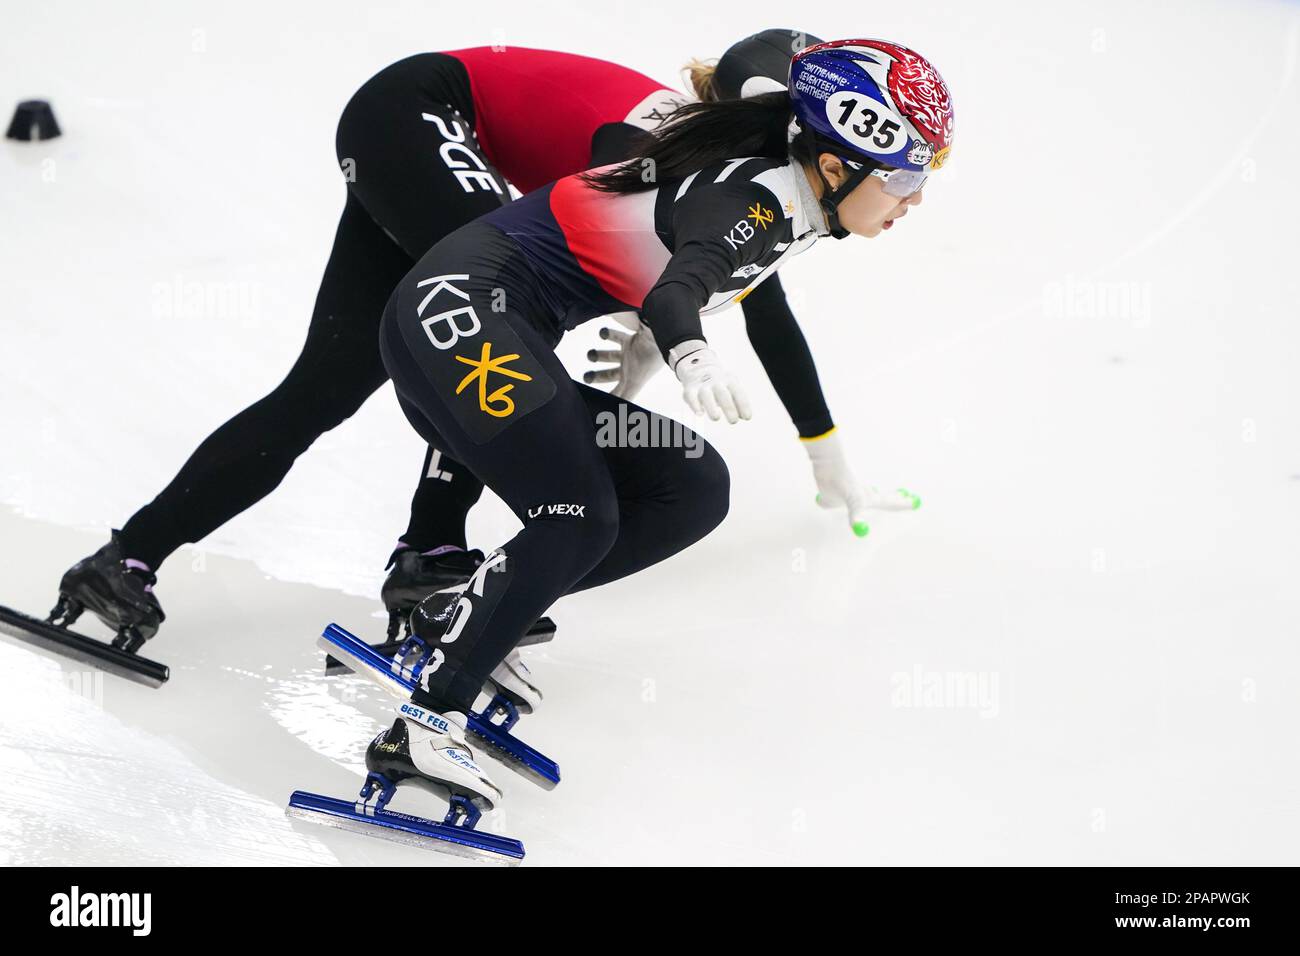 SEOUL, KOREA - MARCH 12: Geonhee Kim of Korea competing on the Women's 1000m during the ISU World Short Track Speed Skating Championships at Mokdong Ice Rink on March 12, 2023 in Seoul, Korea (Photo by Andre Weening/Orange Pictures) Stock Photo